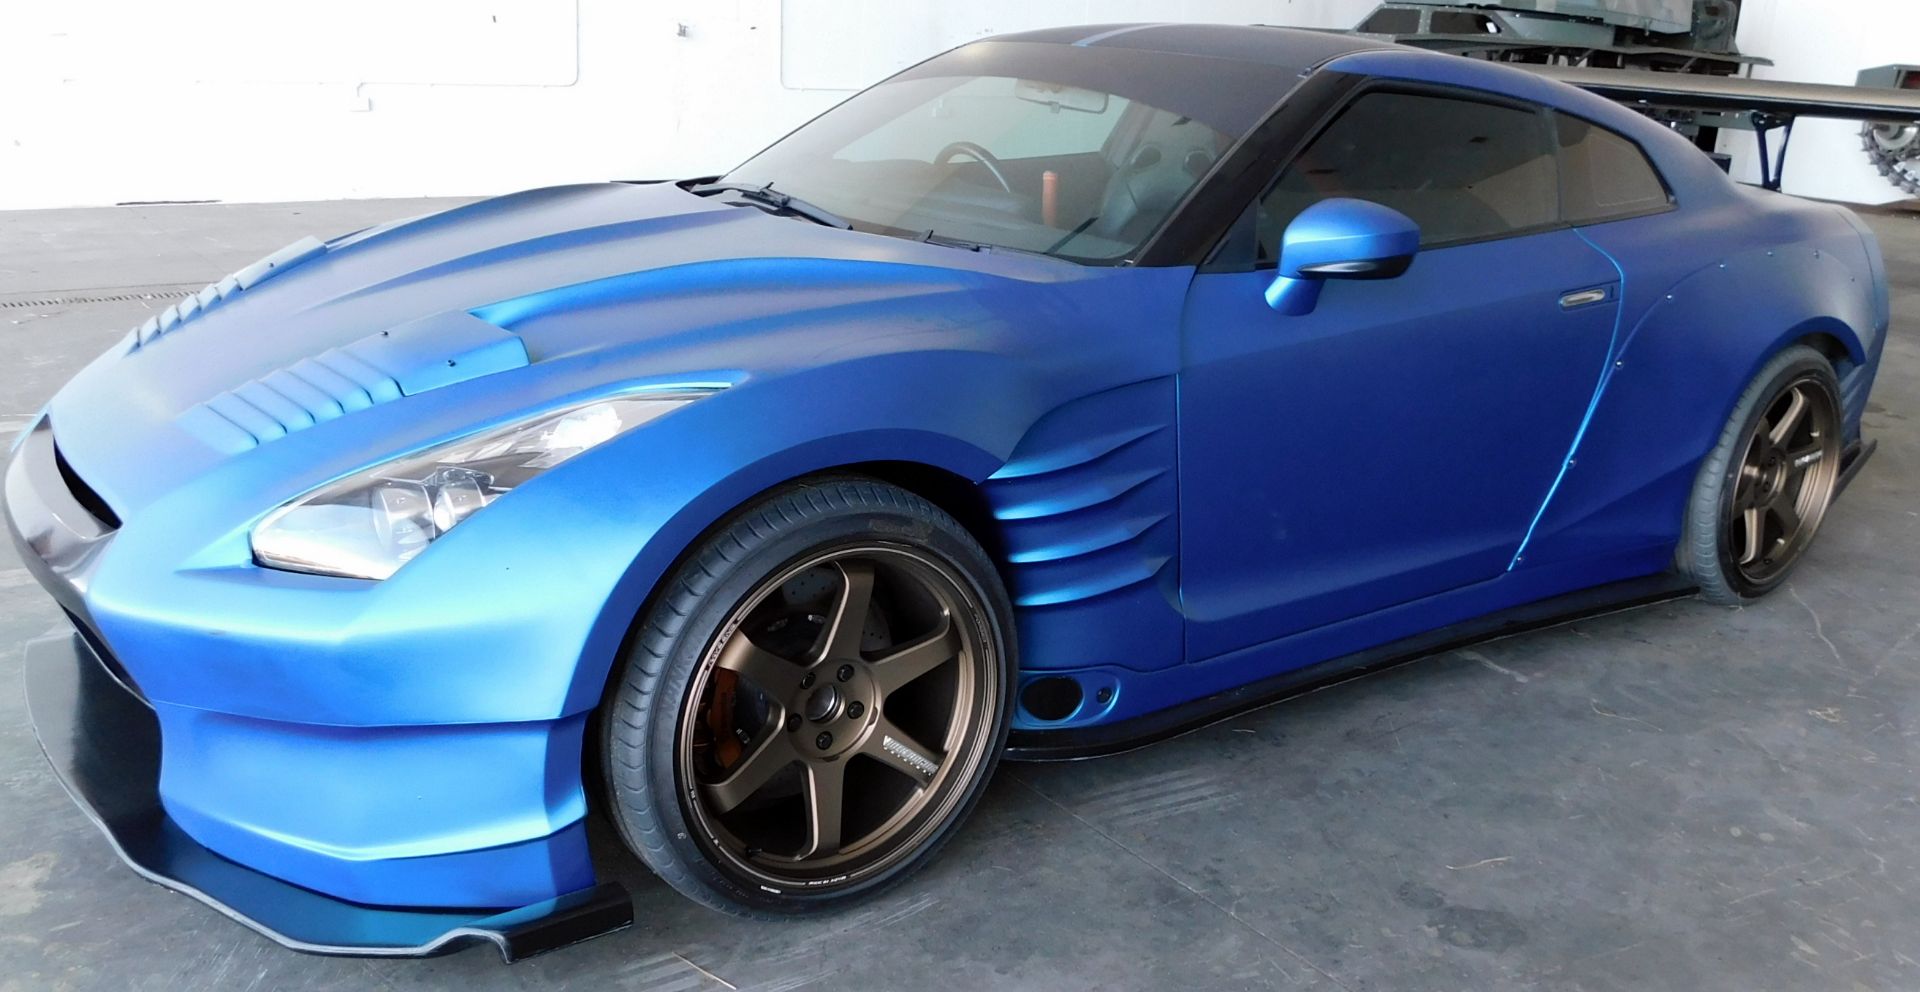 Nissan GTR 2 Door RHD Coupe, 3.8 Litre Engine, Manual Gearbox, Bensopera Body Kit, Not Road Legal, - Image 3 of 12